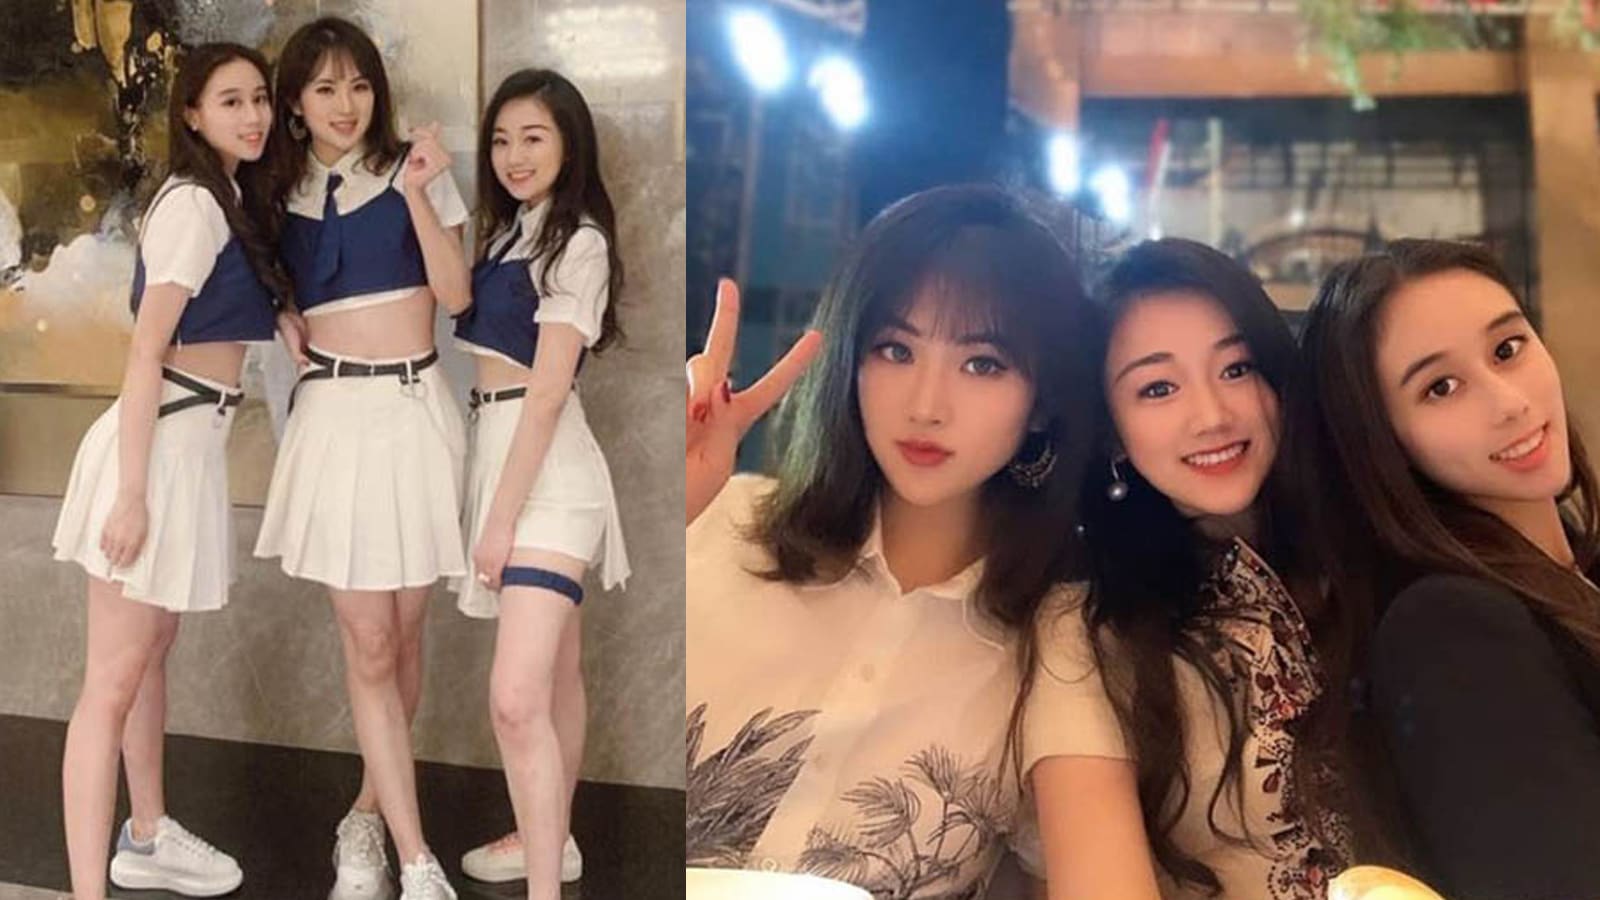 Stanley Ho’s Daughter Said To Be Making Showbiz Debut In Girl Group With Huawei & Sanpower Heiresses